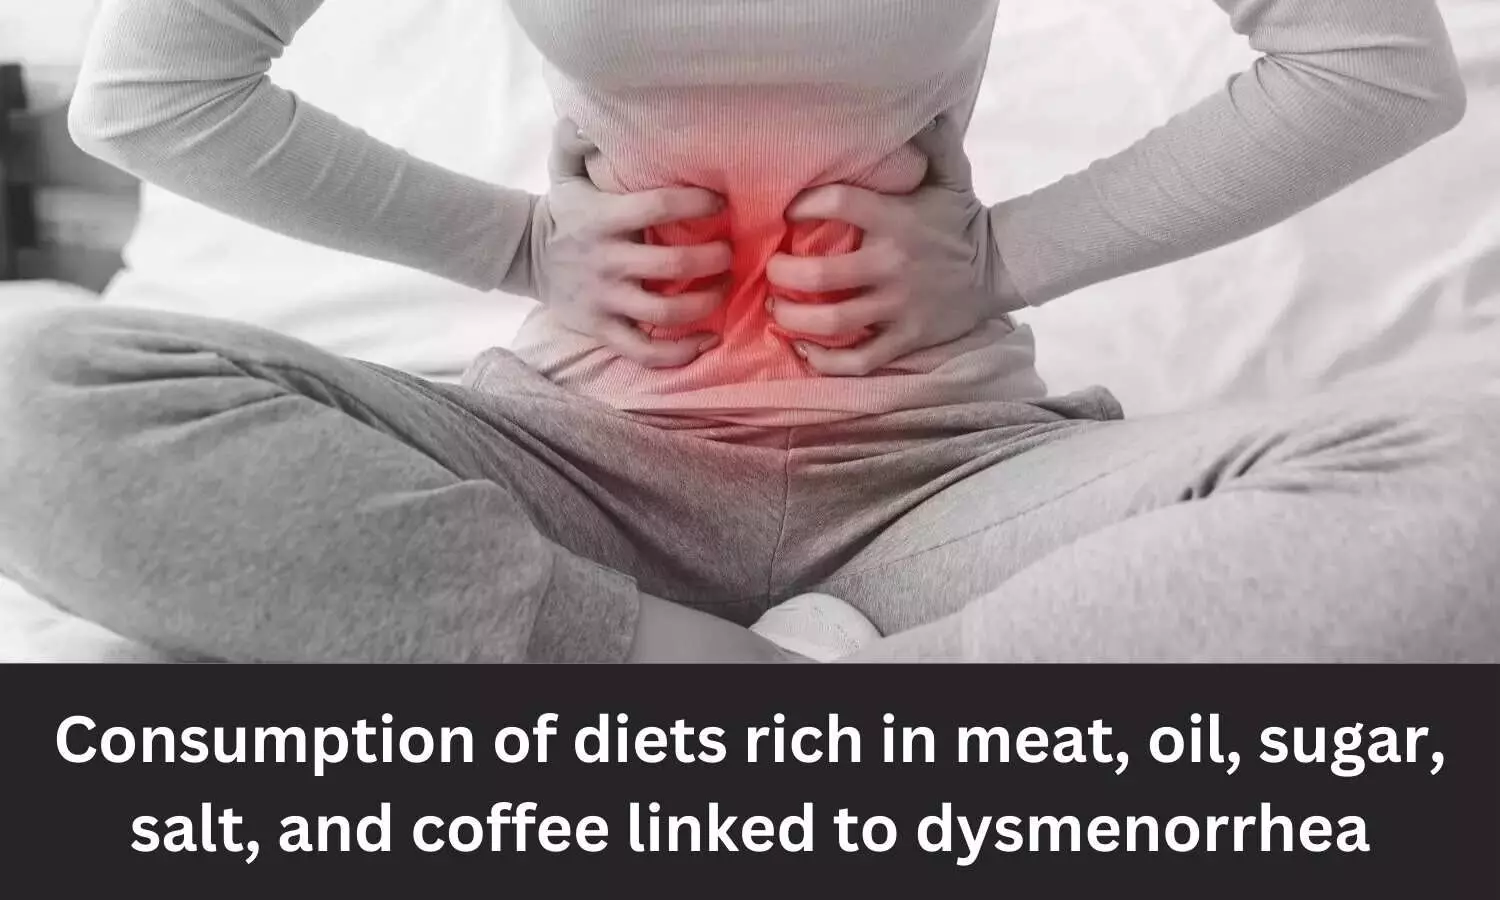 Consumption of diets rich in meat, oil, sugar, salt, and coffee linked to dysmenorrhea